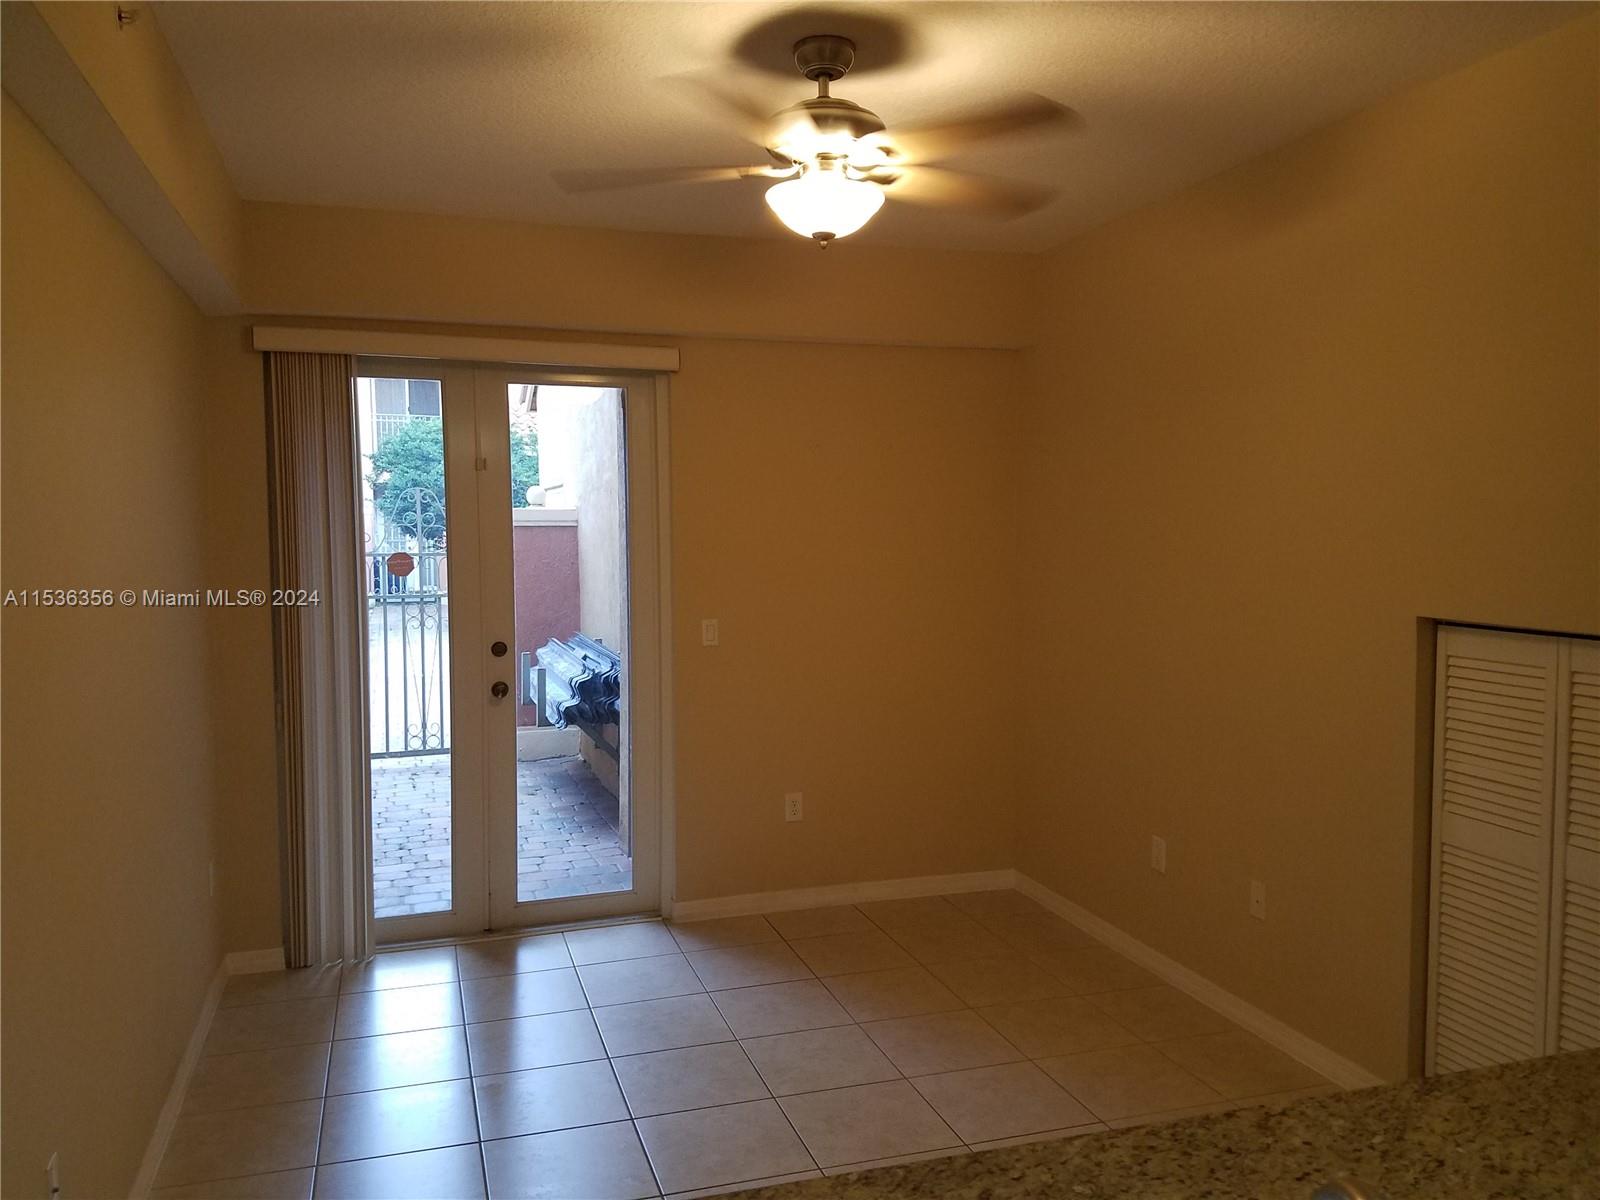 Photo 13 of 19 of listing 6001a37a-b9a7-4985-aaac-214273638c24 condo